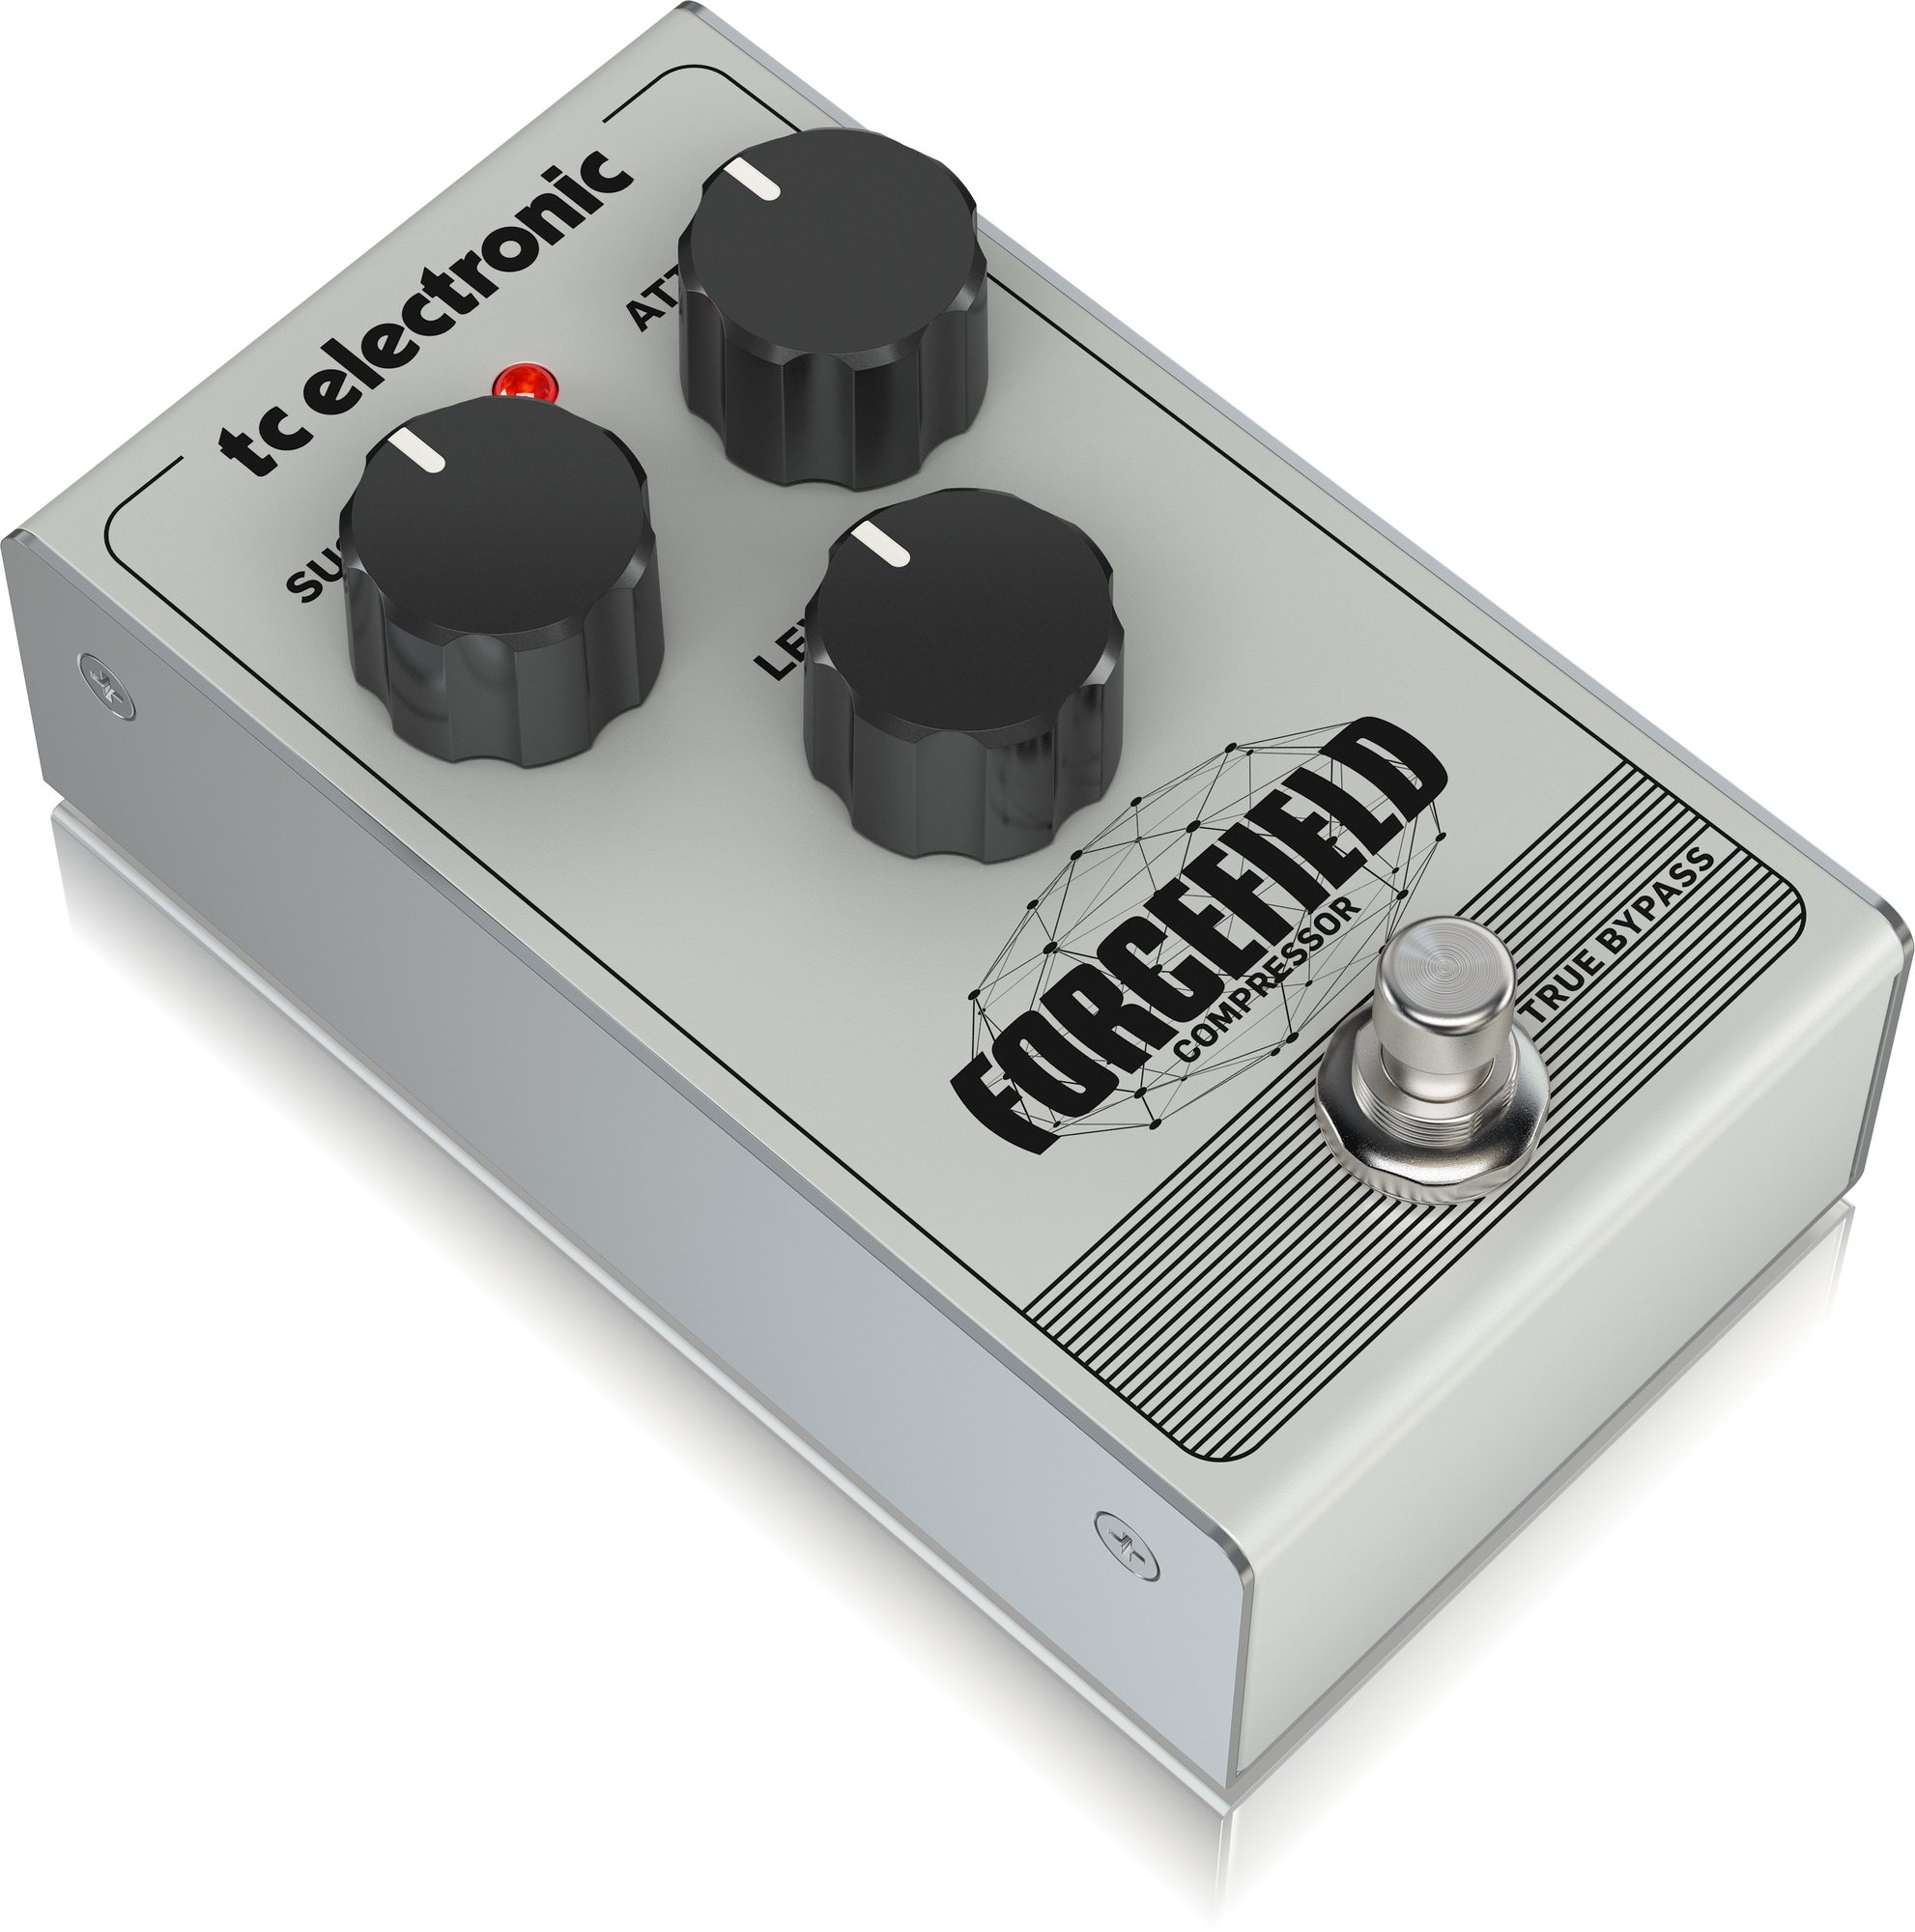 TC Electronic FORCEFIELD Classic Compressor/Limiter Pedal with Endless Sustain, TC ELECTRONIC, EFFECTS, tc-electronic-effects-tc-forcefield-compressor, ZOSO MUSIC SDN BHD